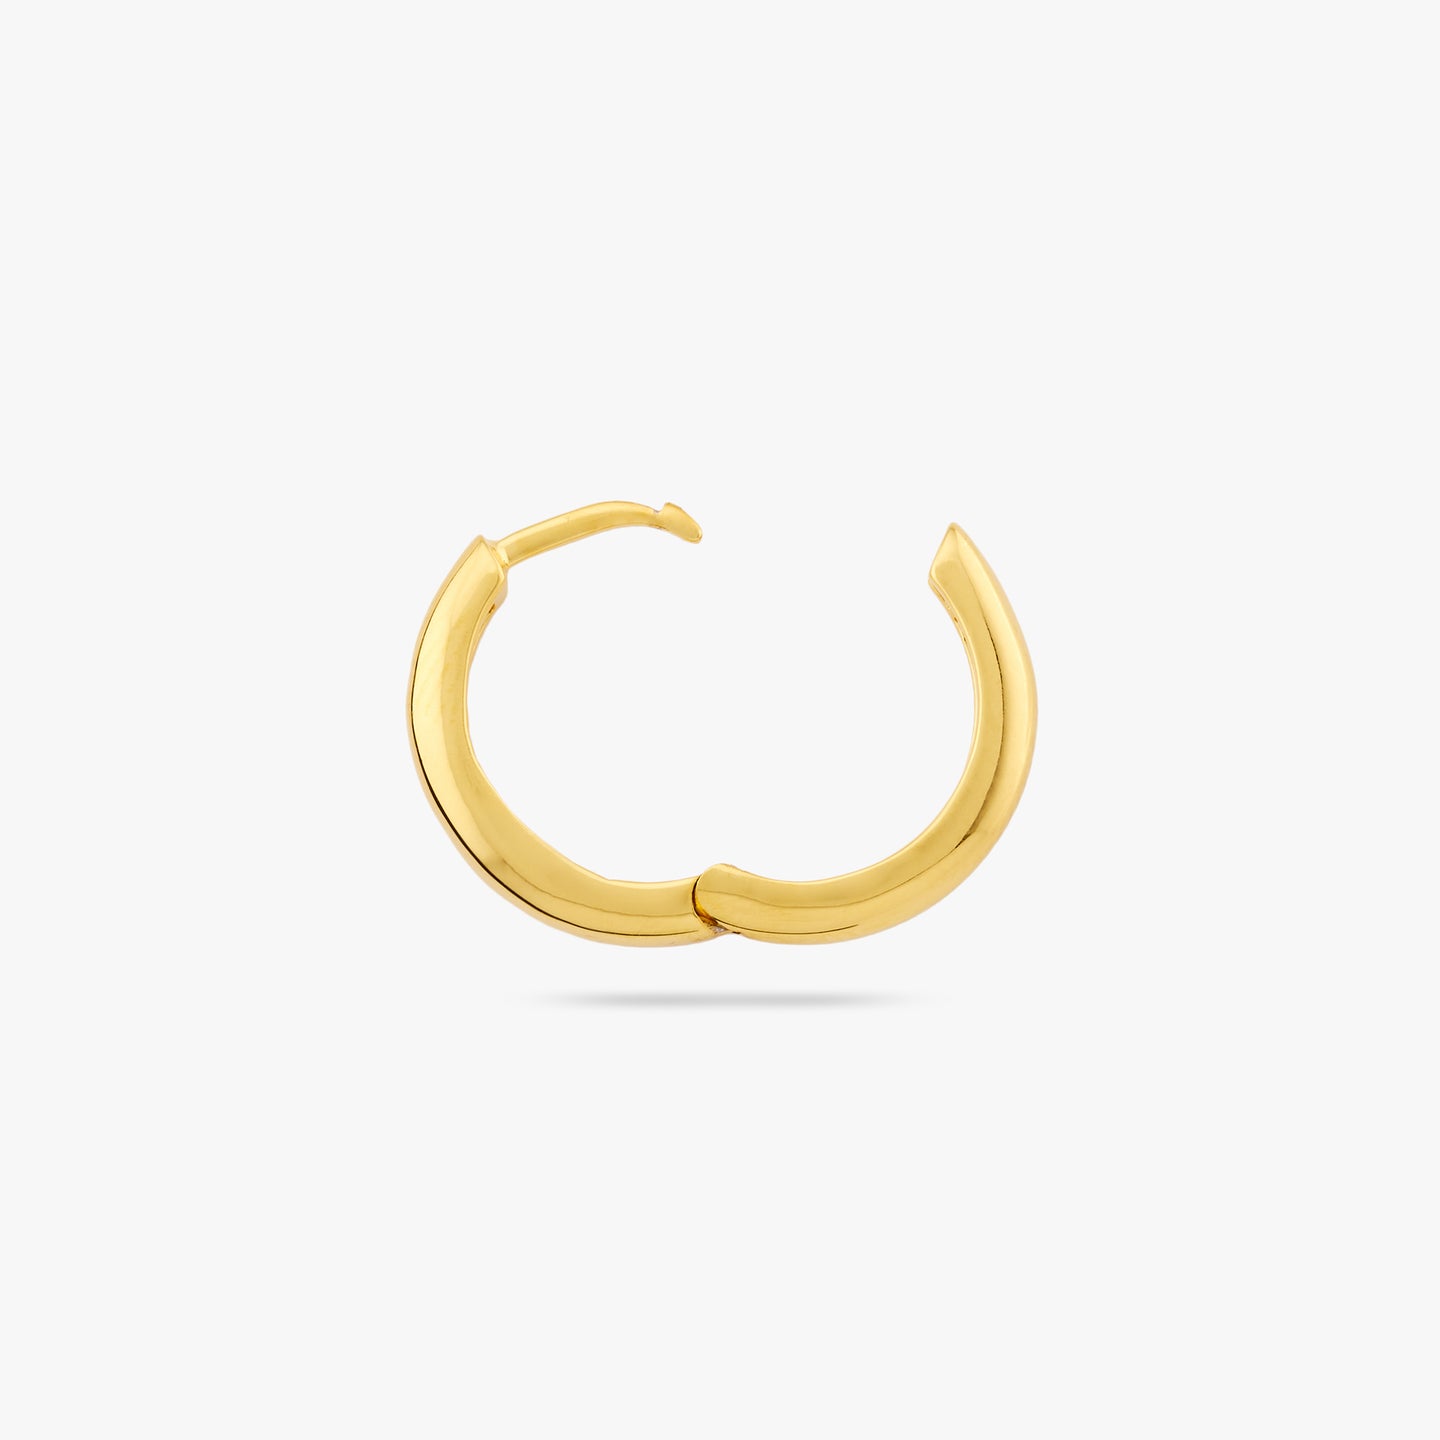 Small bulky and chunky shaped gold hoop and the clasp is undone color:null|gold